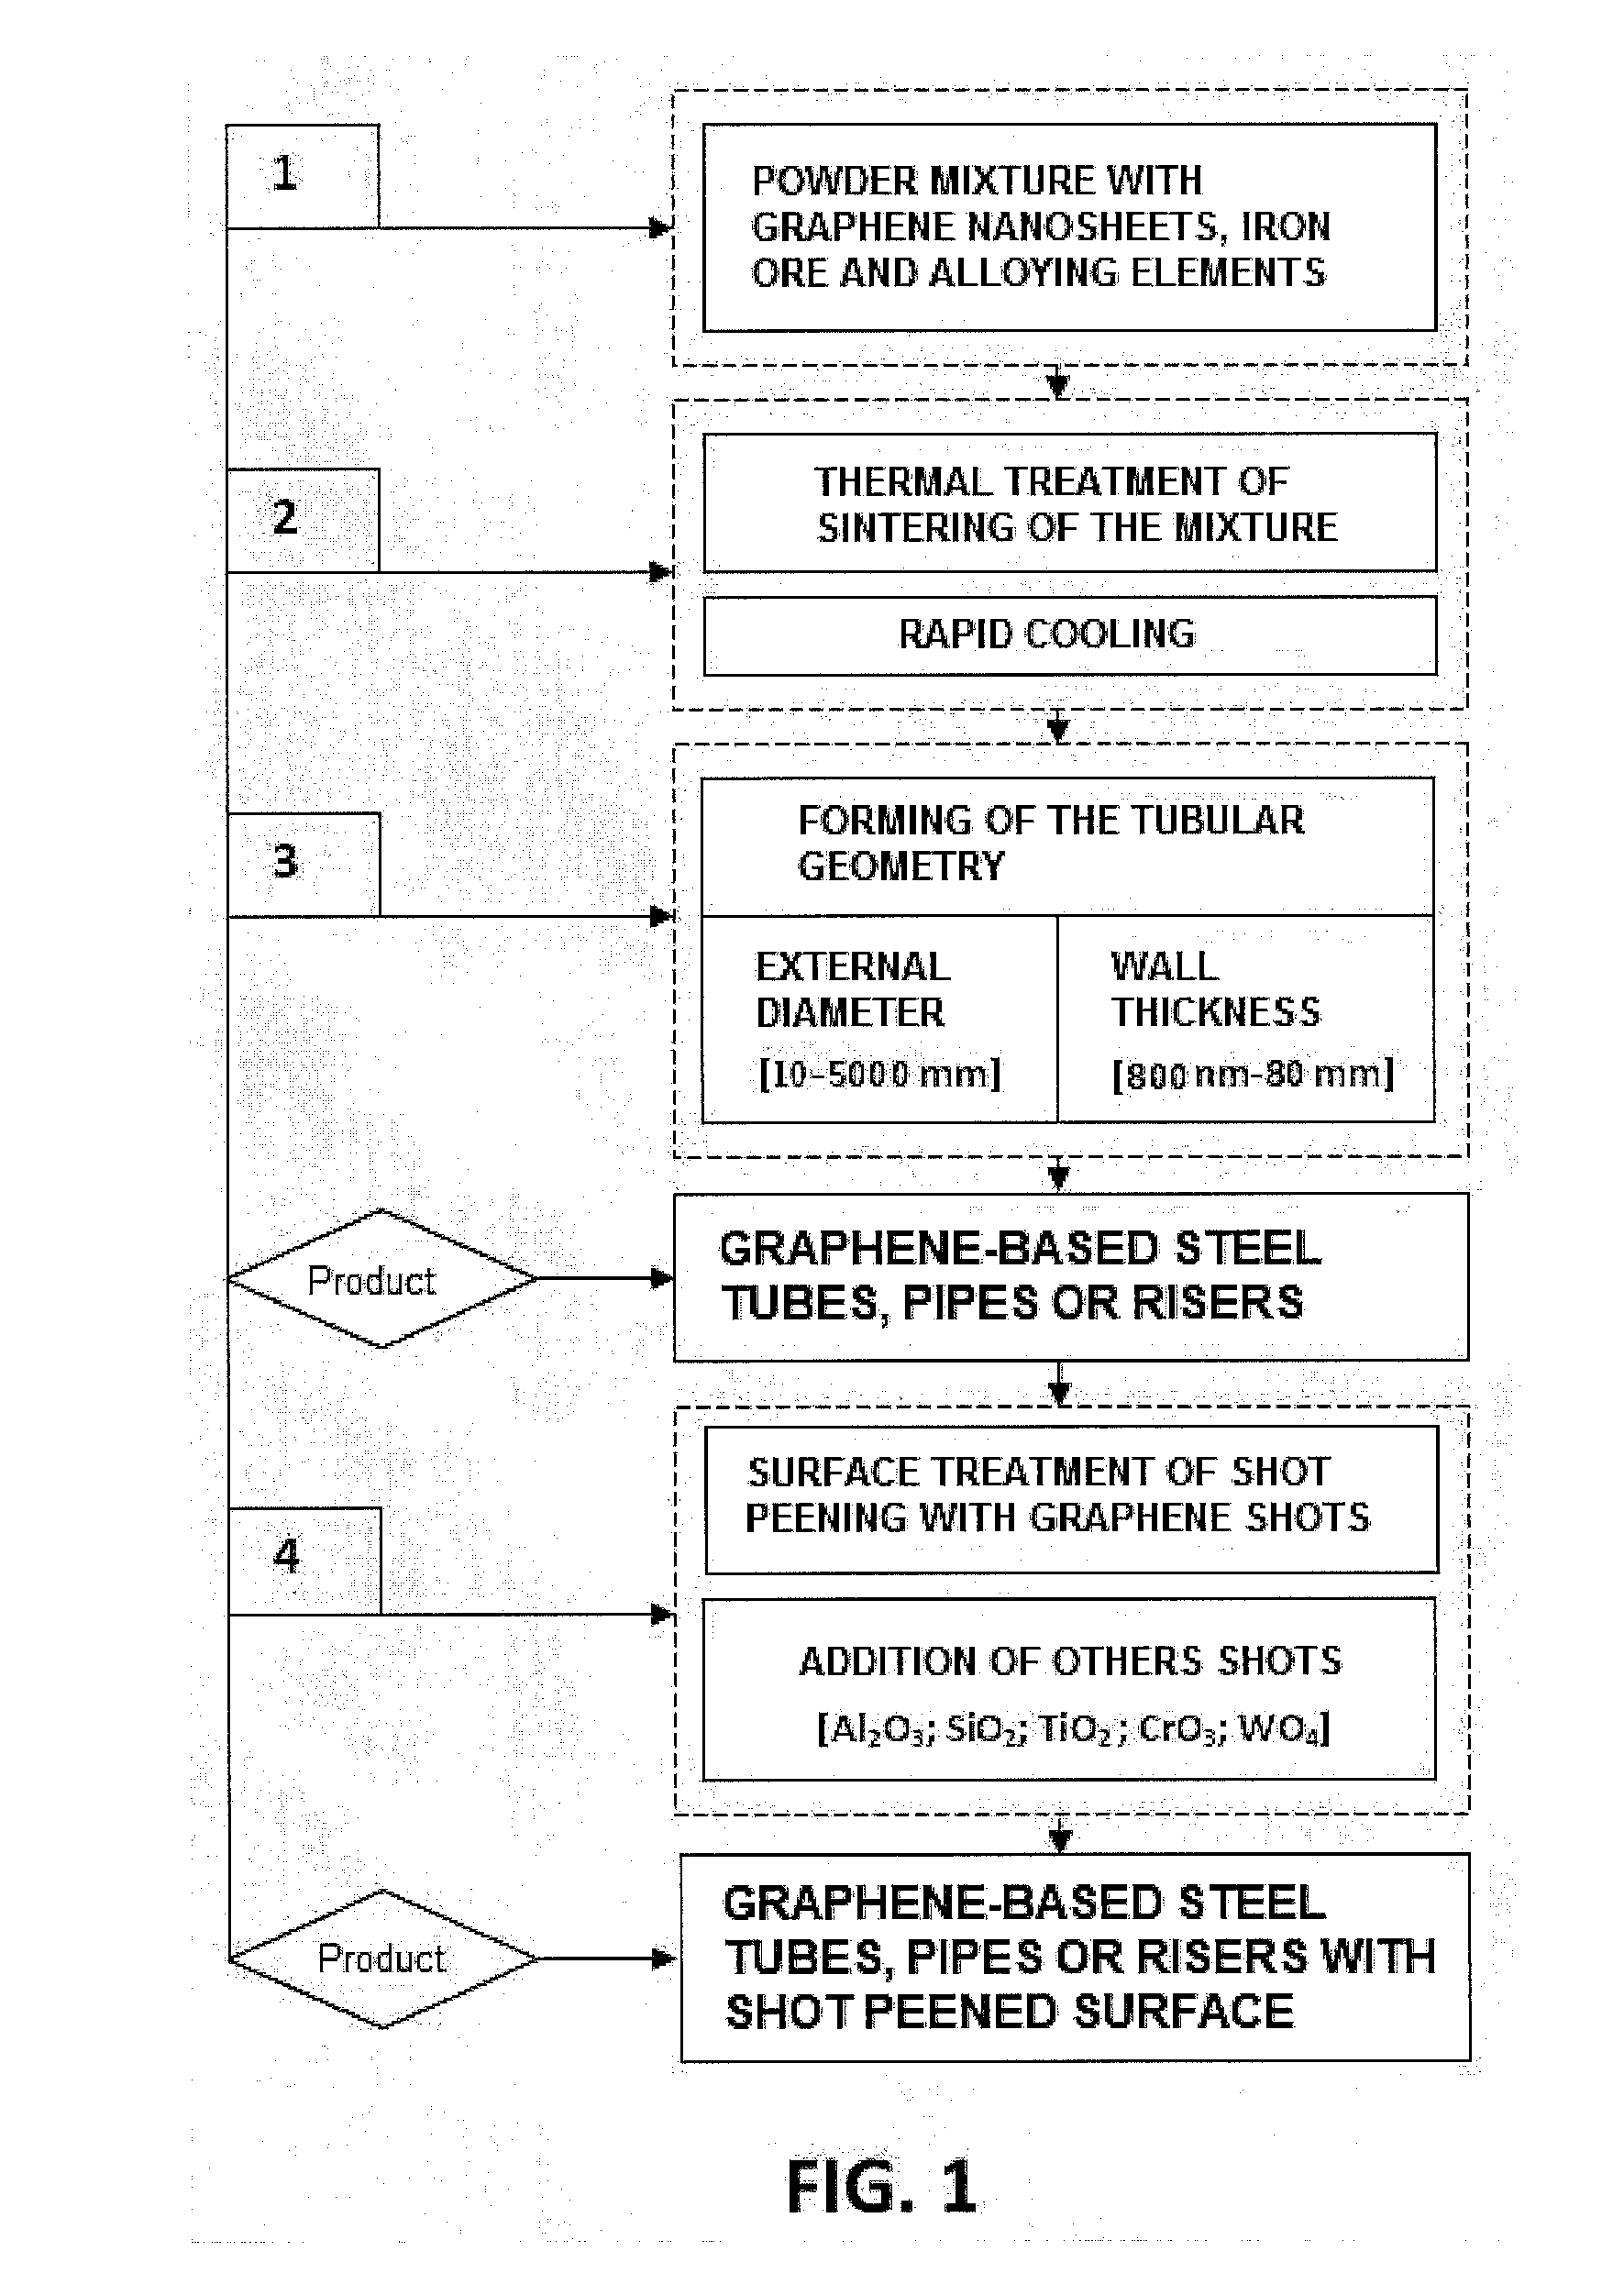 Graphene-based steel tubes, pipes or risers, methods for the production thereof and the use thereof for conveying petroleum, gas and biofuels